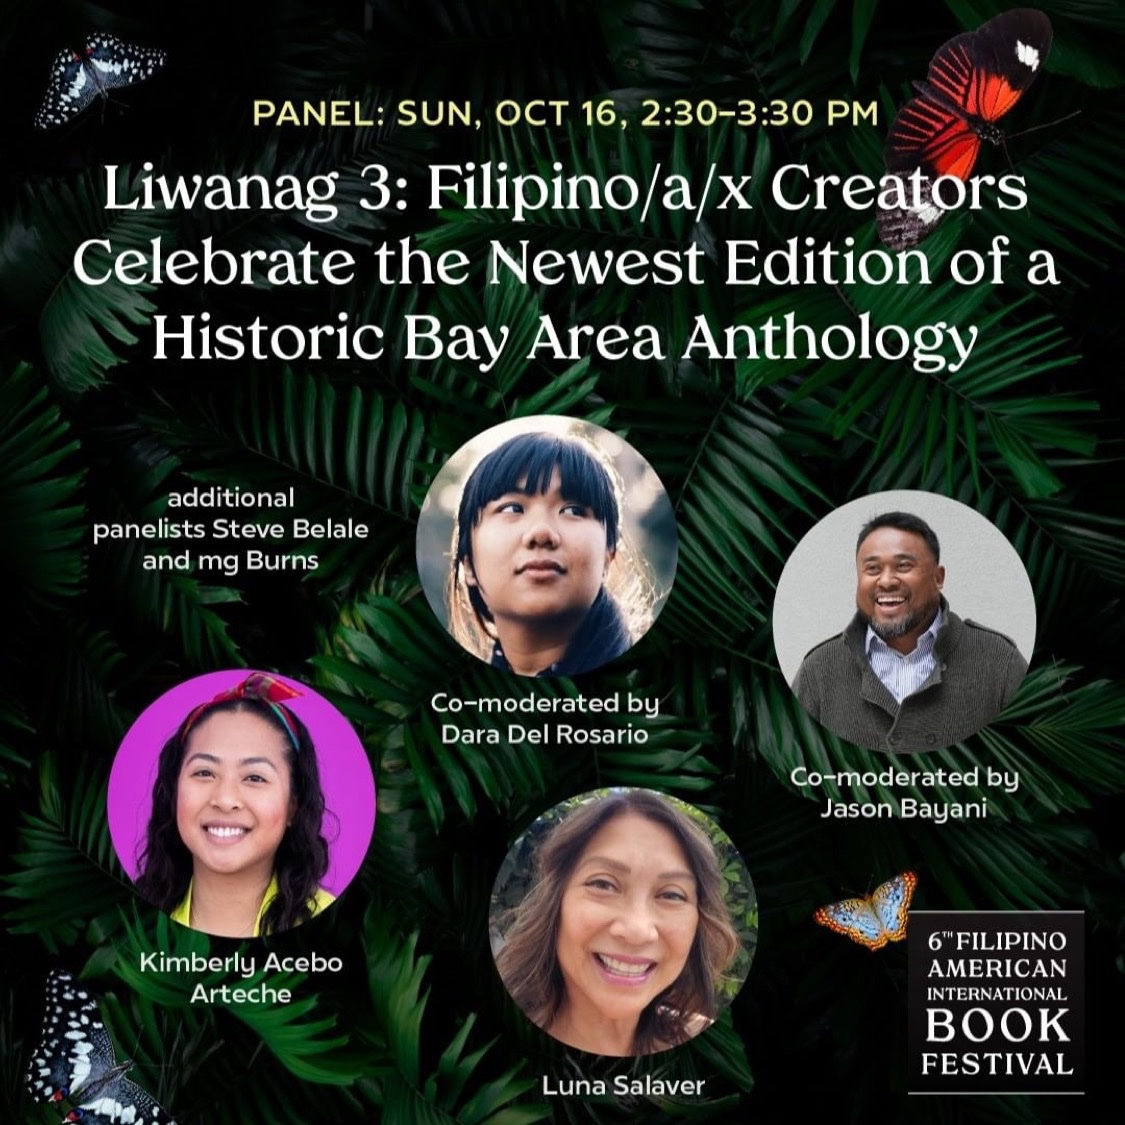 I’m so excited to co moderate this panel alongside @jasonbayani for the 6th FilAm Book Fest 🥹 See you there?